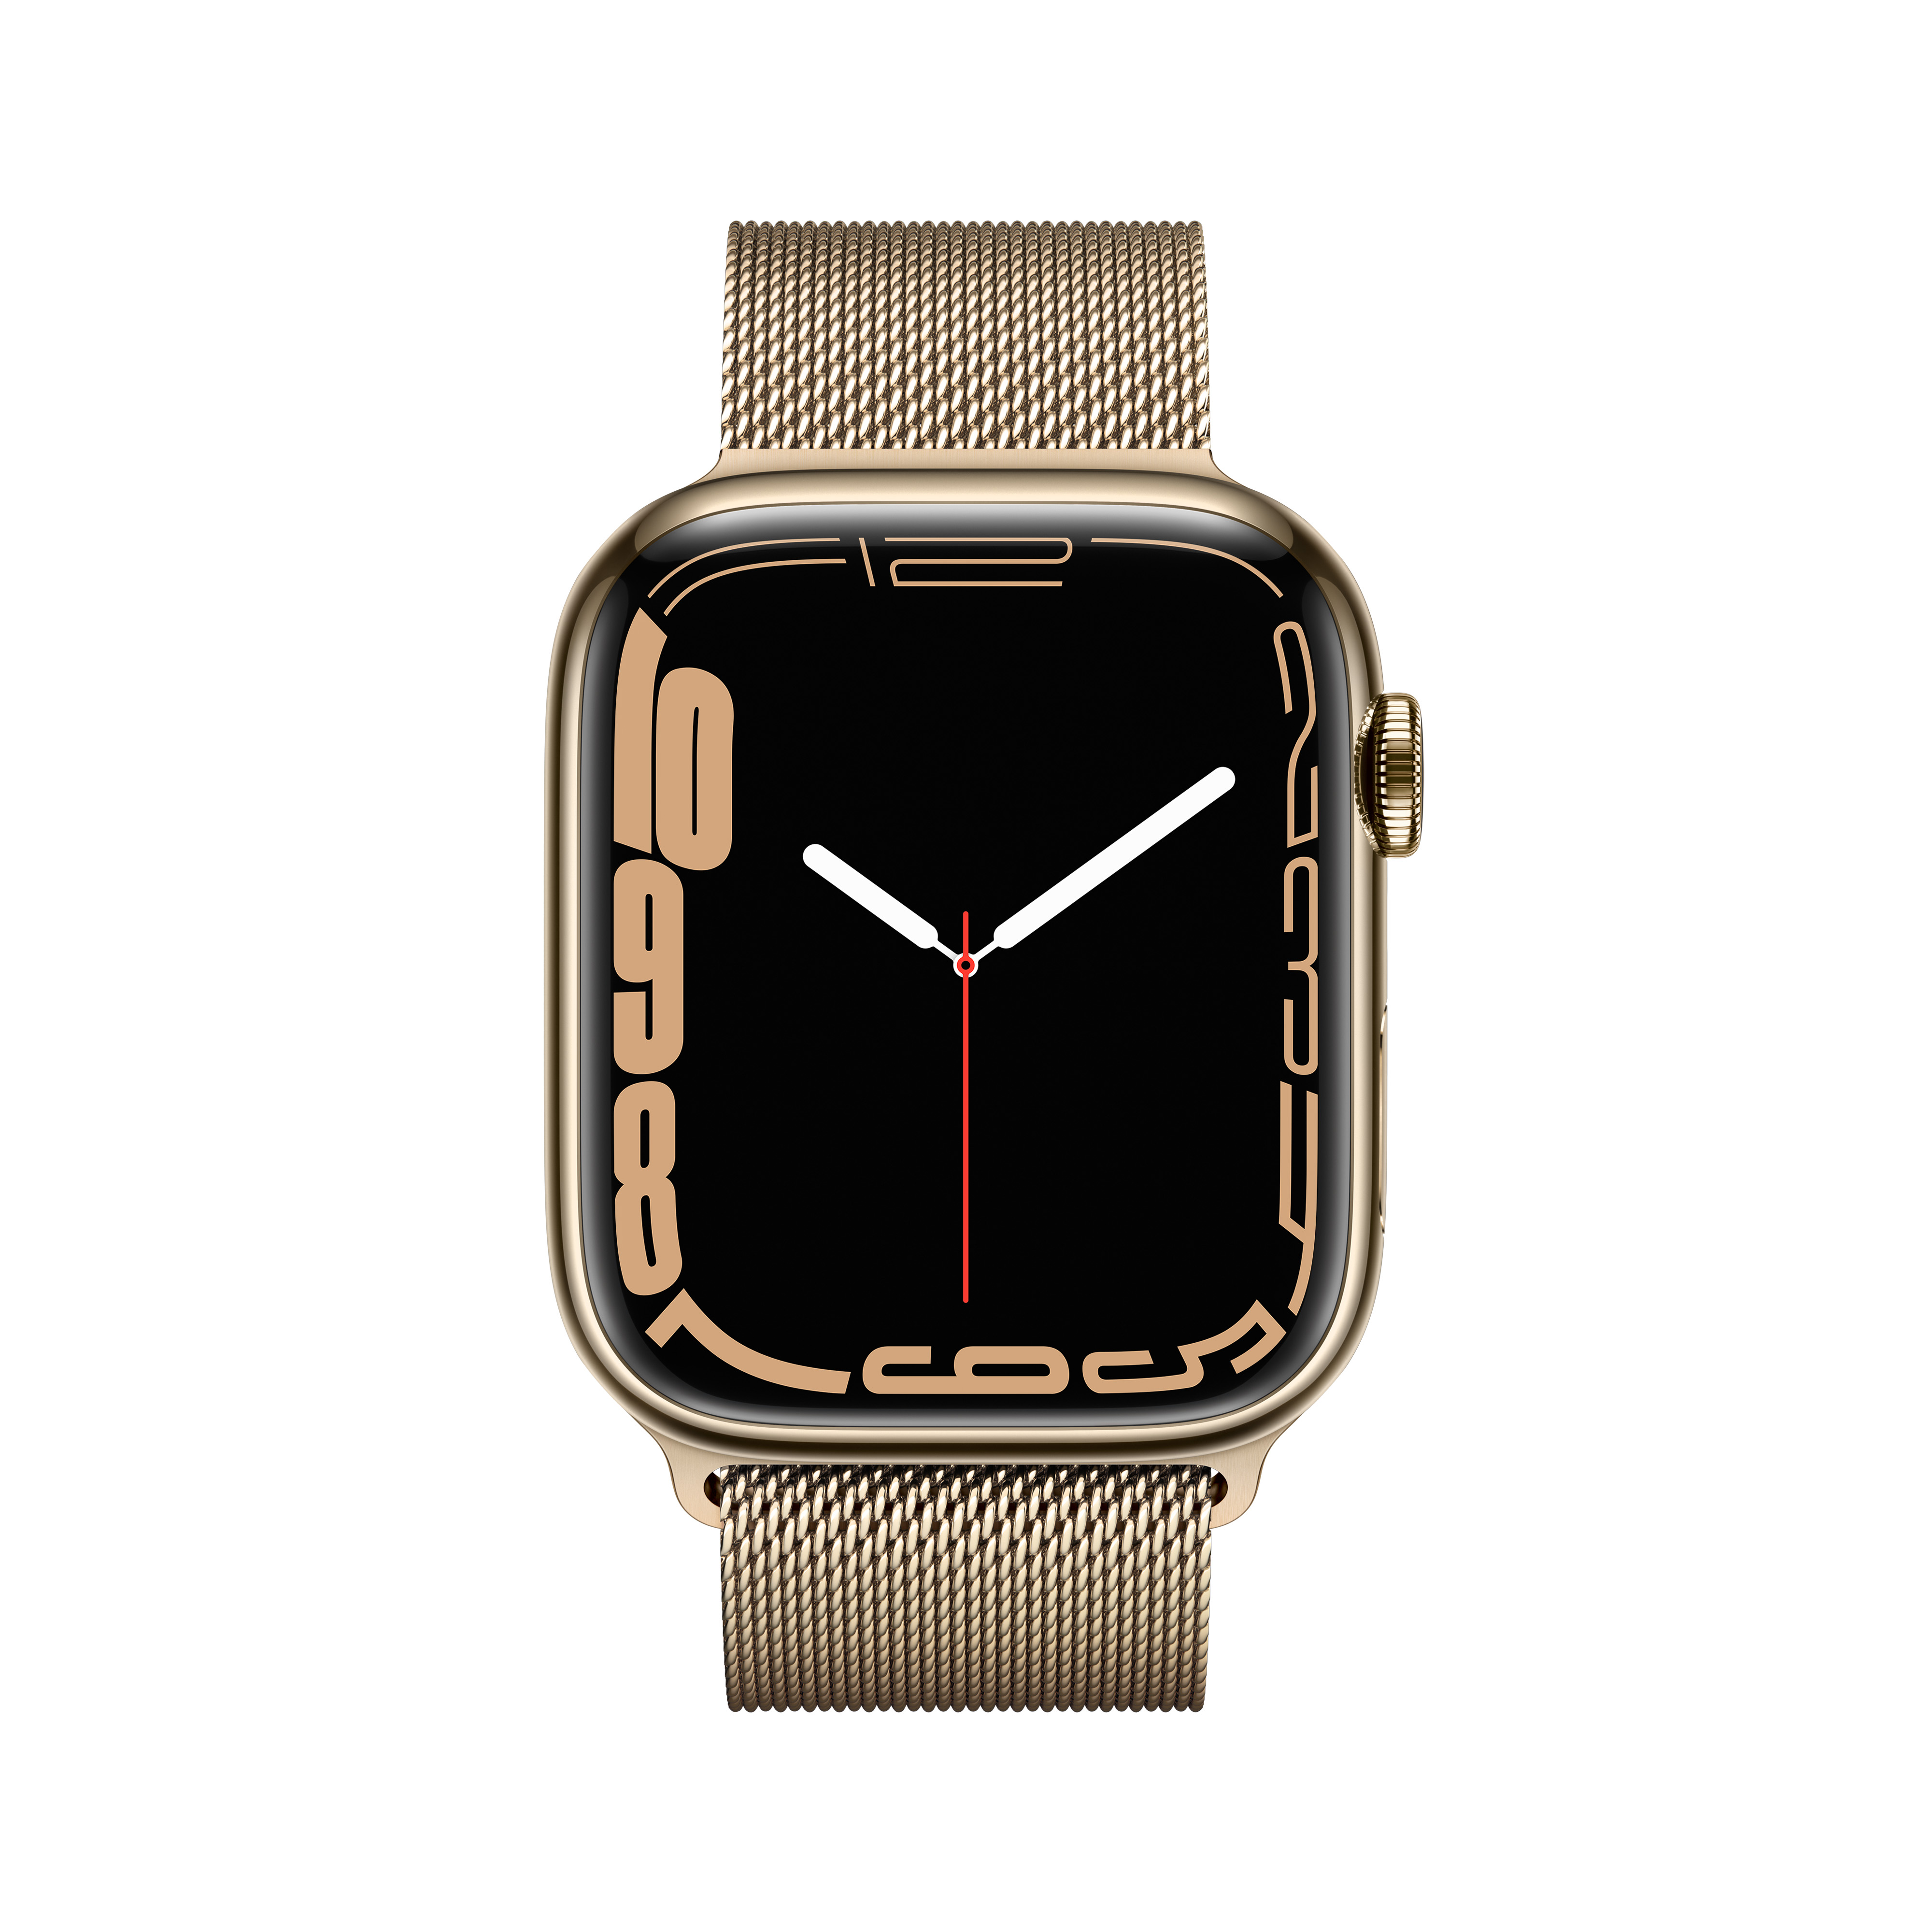 Apple_Watch_Series_7_Cell_45mm_Gold_Stainless_Steel_Gold_Milanese_Loop_PDP_Image_Position-2__VN.jpg